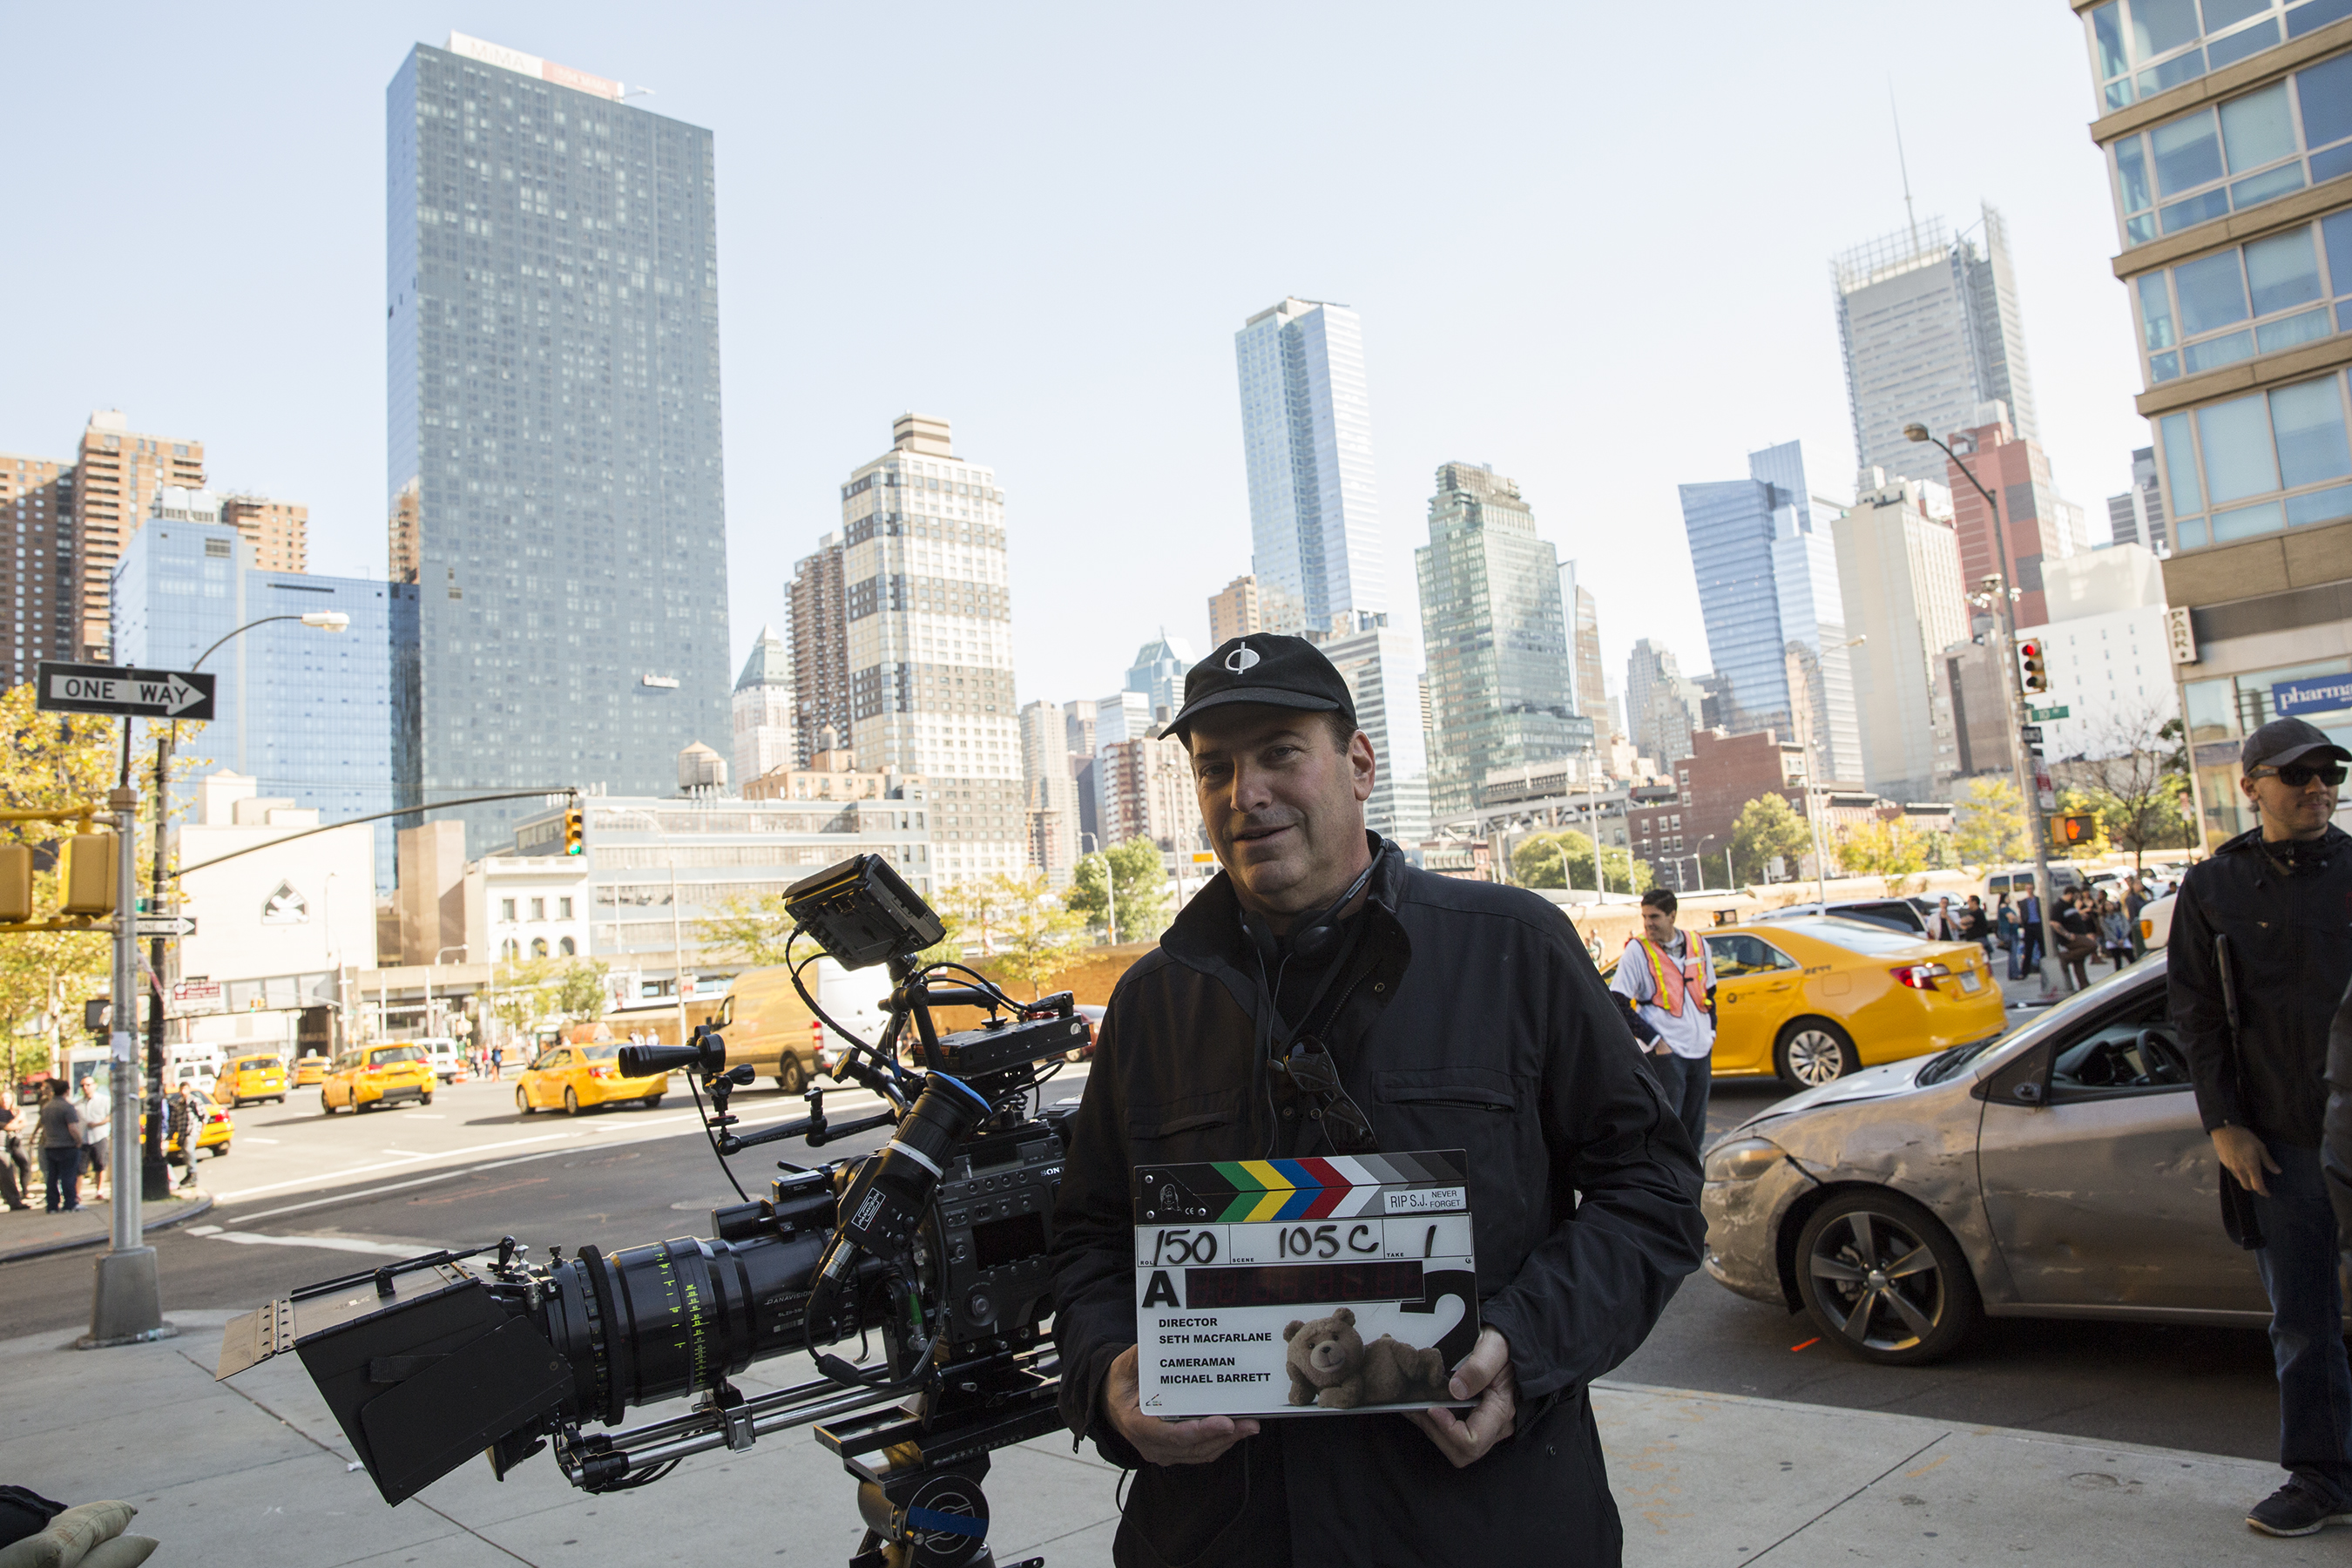 John Jacobs, Producer, Ted 2 Filiming.